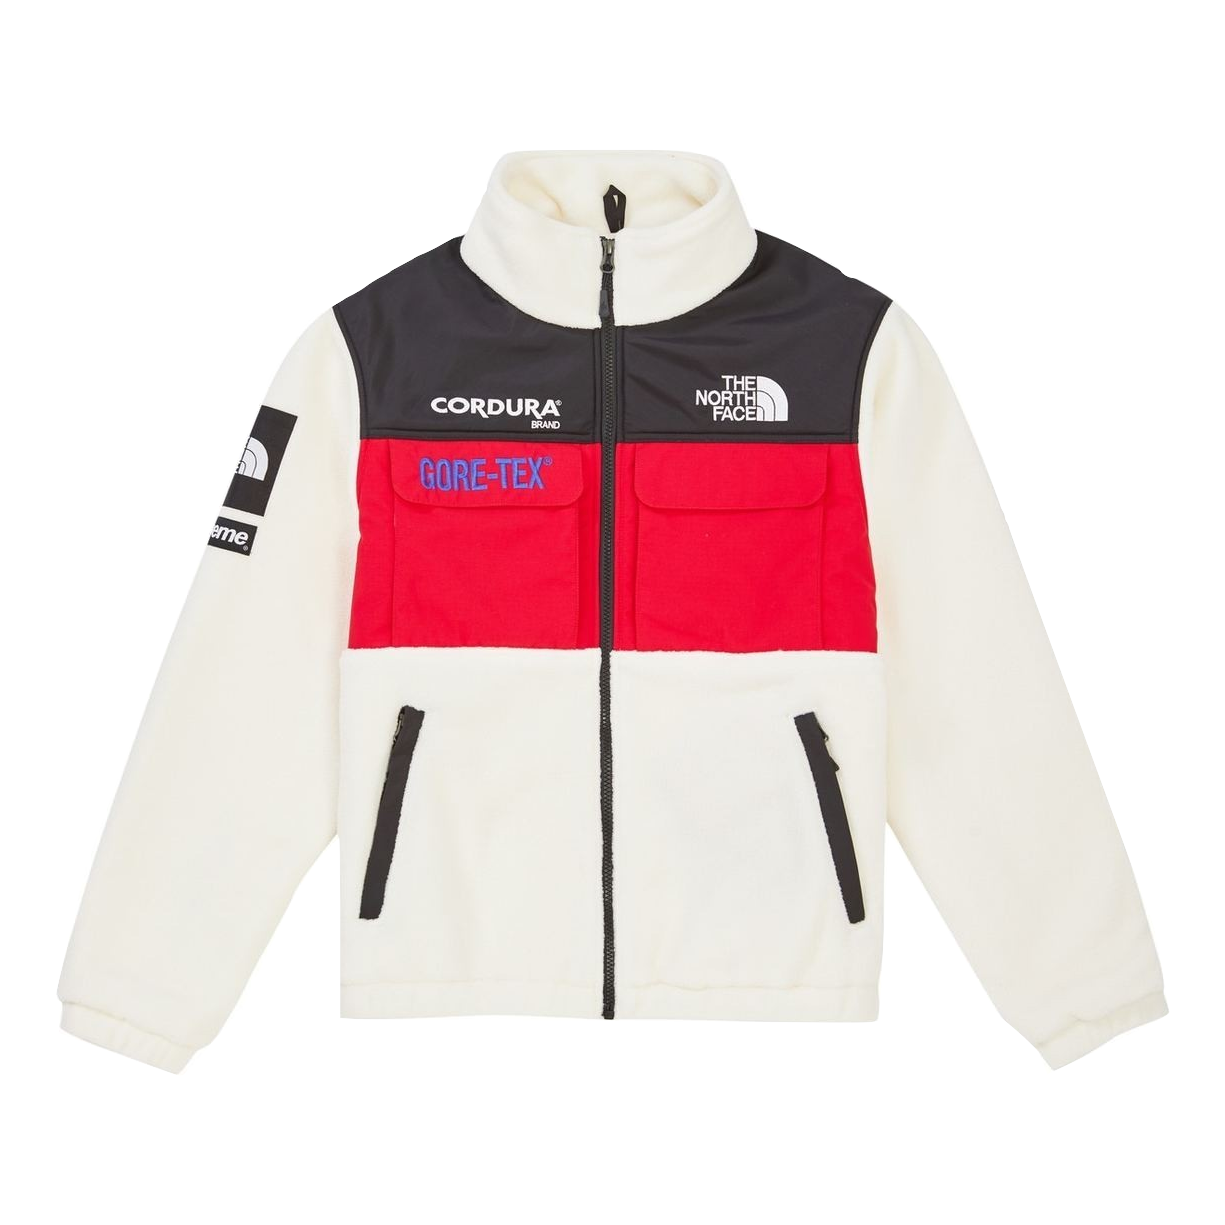 Supreme/The North Face Expedition Fleece (FW18) Jacket - White